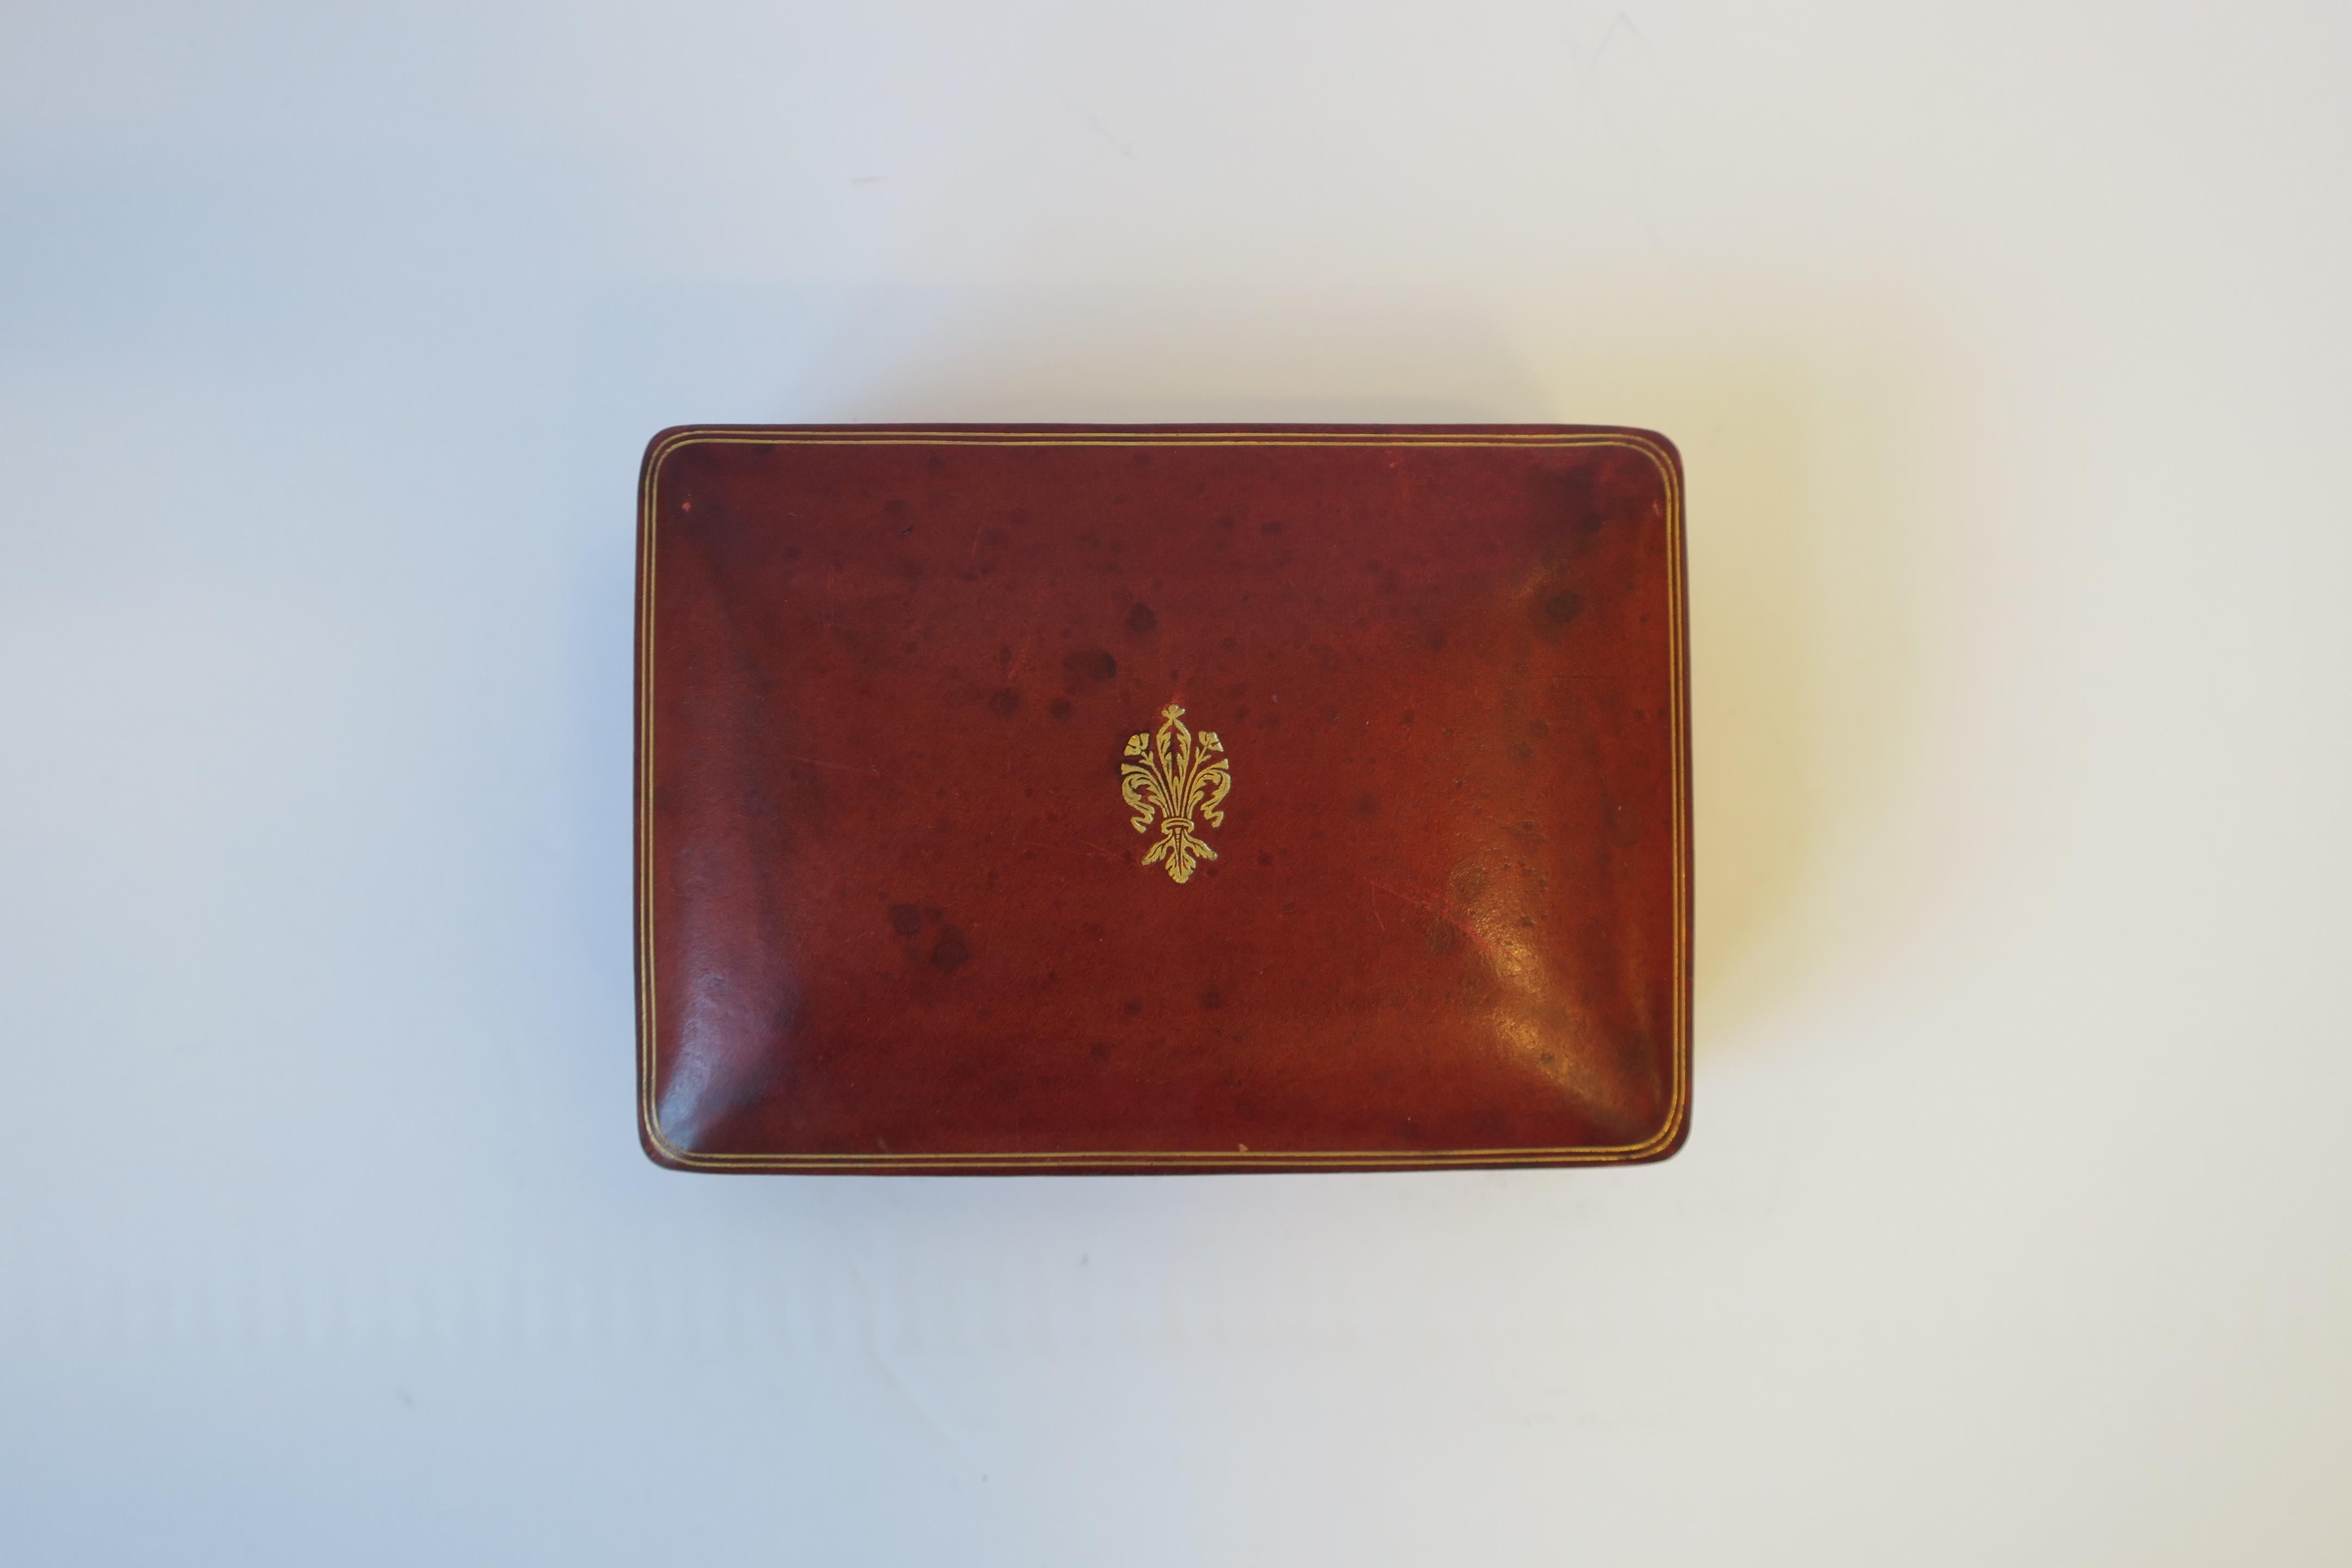 A beautiful mid-20th century Italian red burgundy or 'ox blood' leather jewelry, vanity, or trinket box. with gold embossing. Marked 'LEATHER SCHOOL FLORENCE